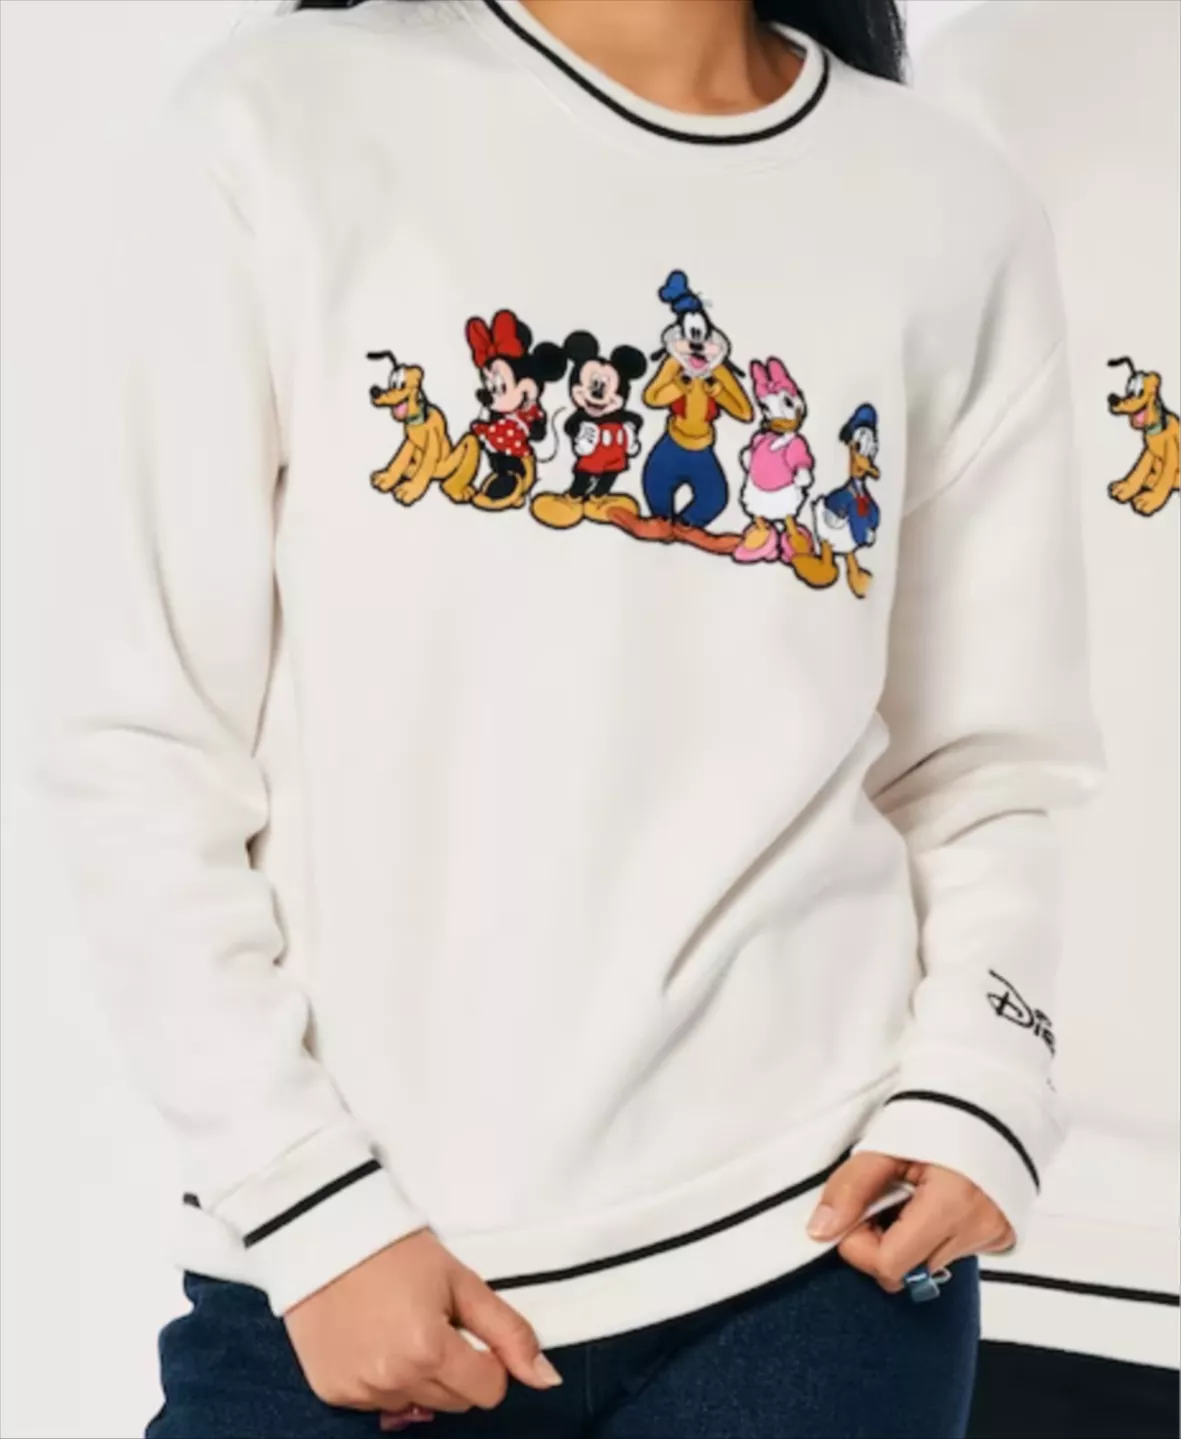 Men's Relaxed Mickey Mouse Graphic Tee